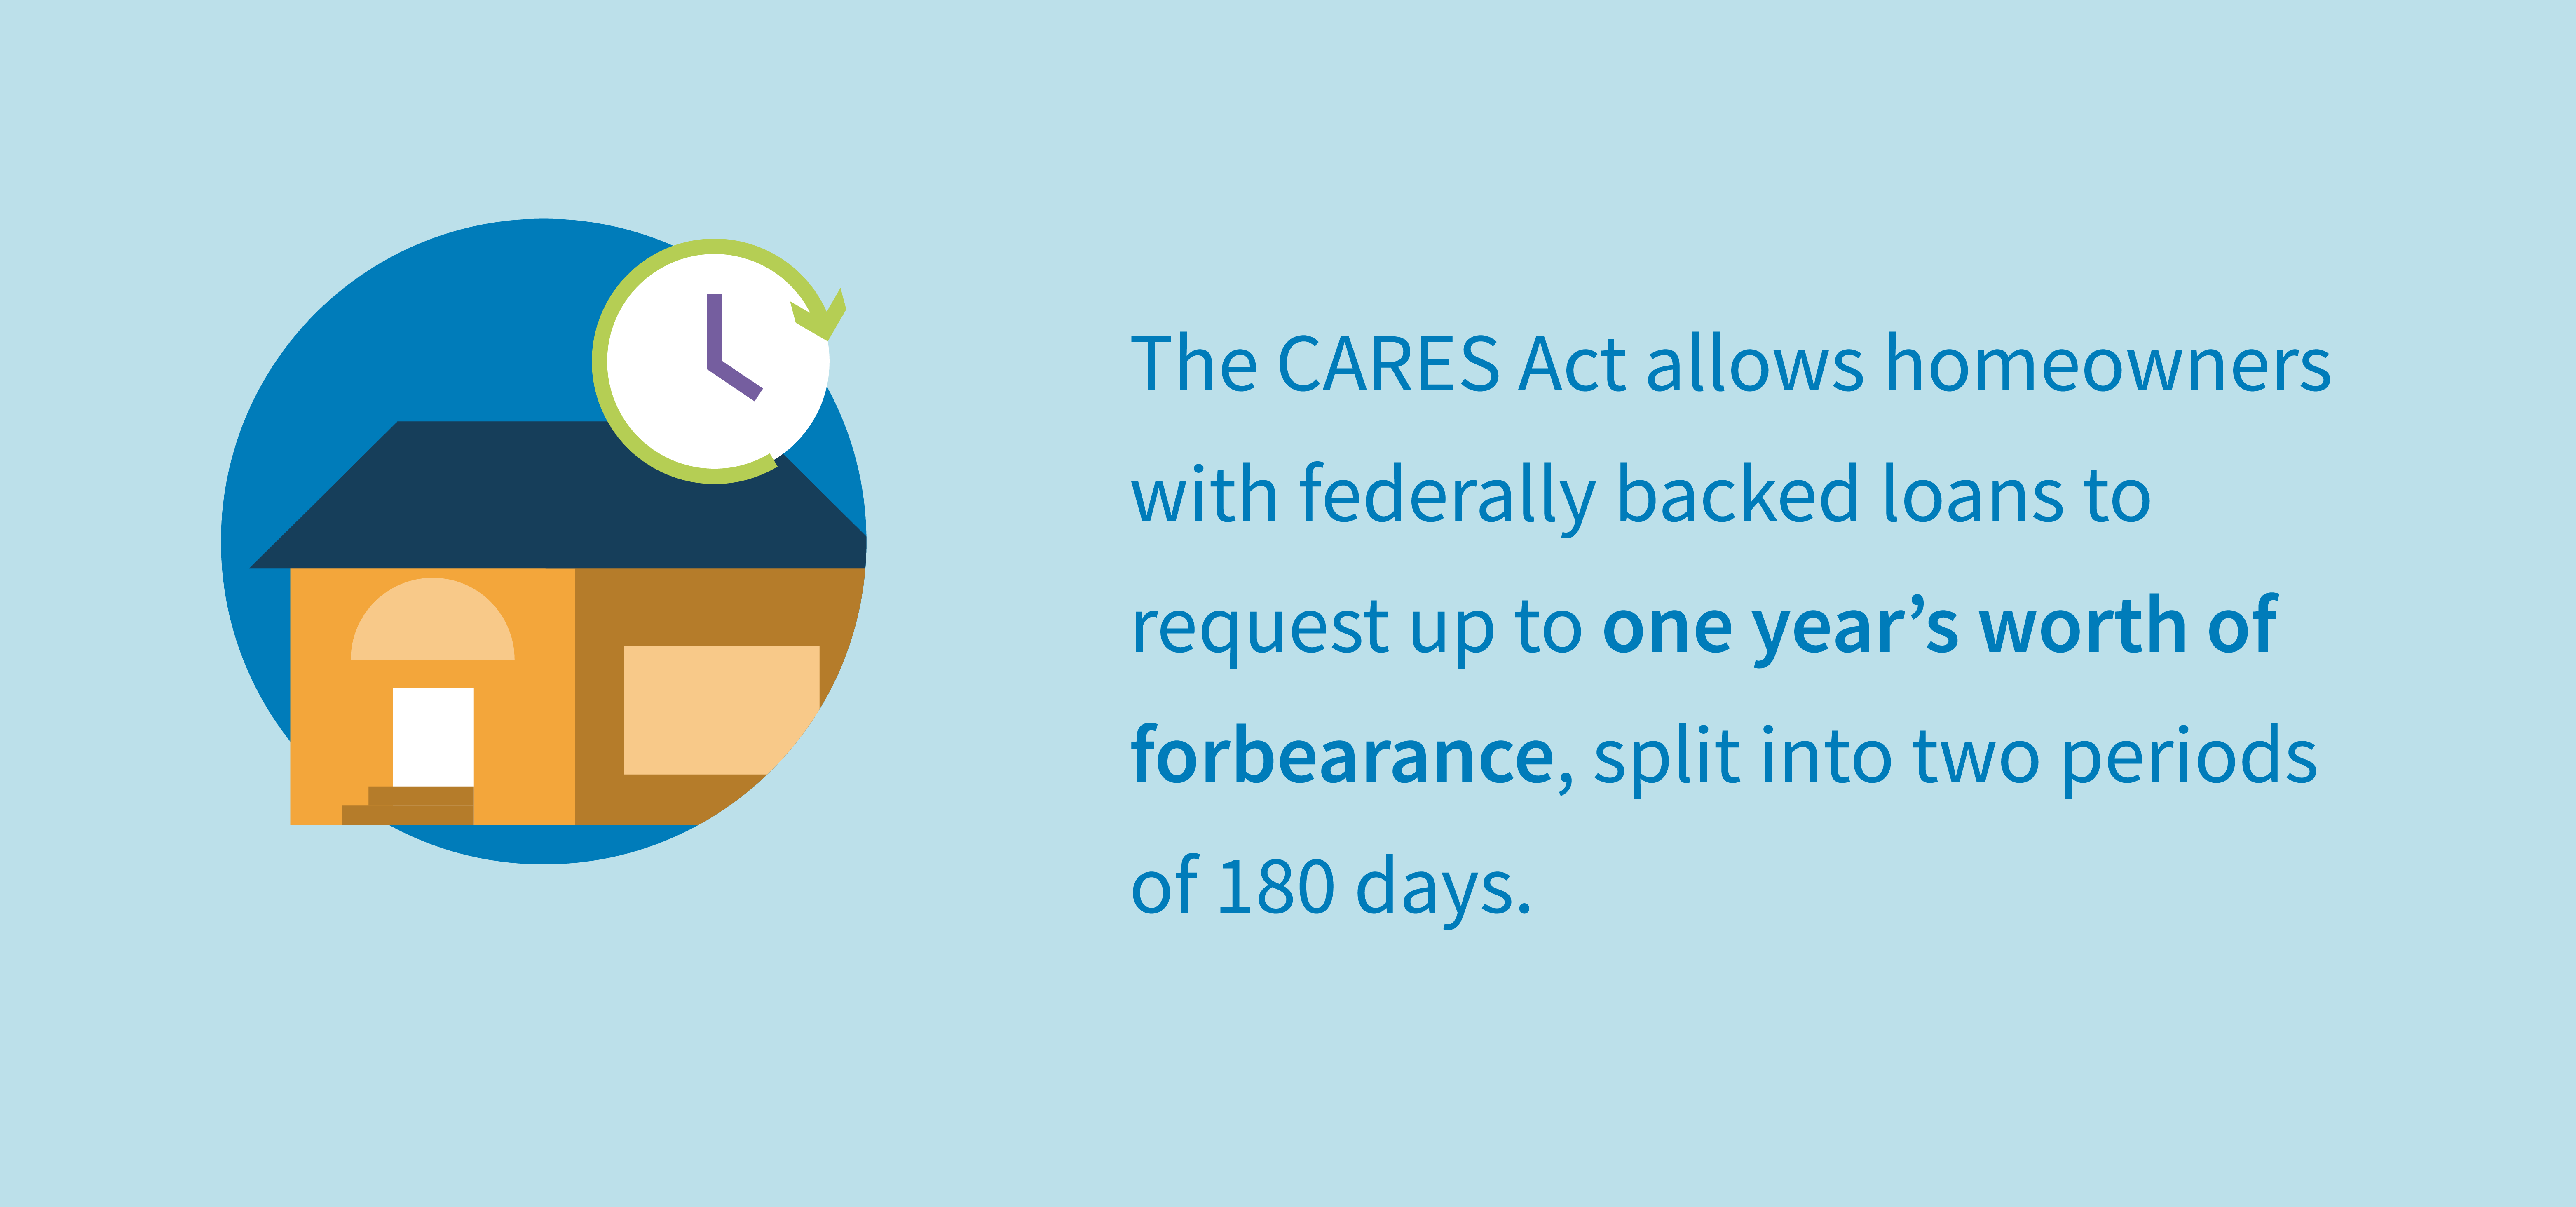 The CARES Act allows homeowners with federally backed loans to request up to one year's worth of forbearance, split into two periods of 180 days.